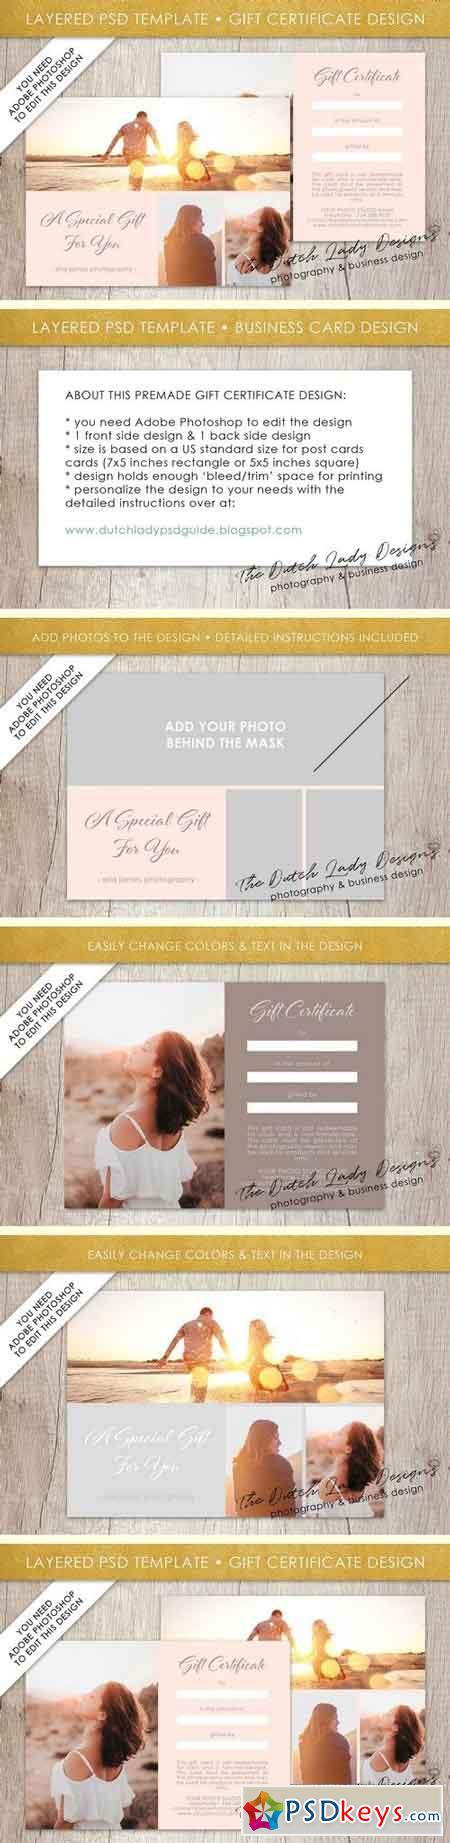 PSD Photo Gift Card Template #1 1929697